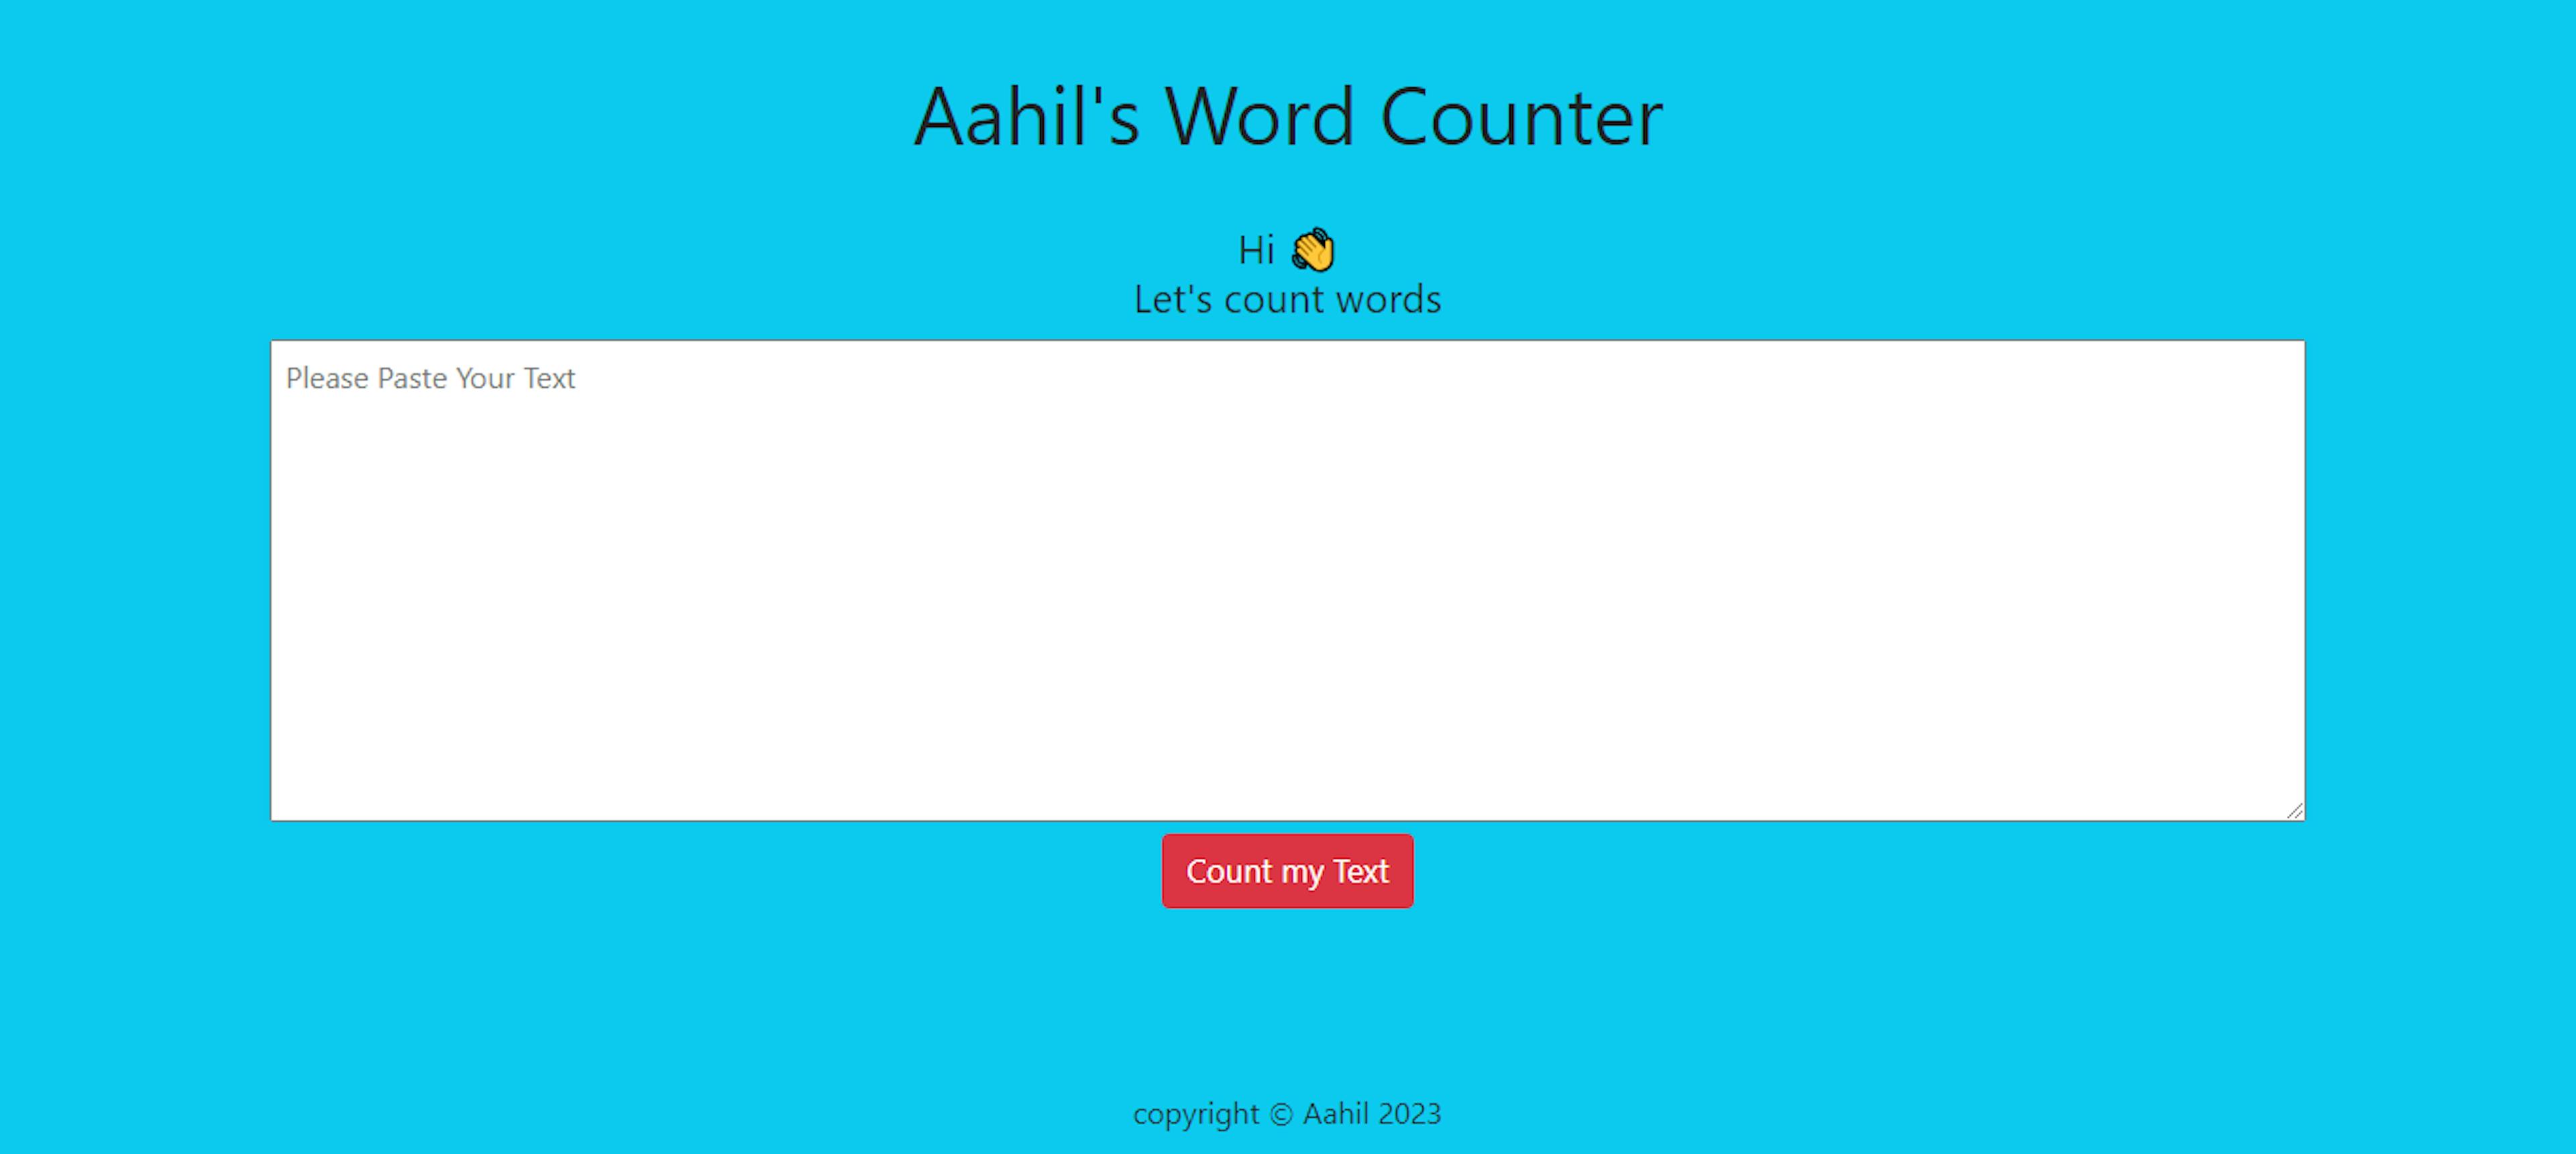 Figure 2: Word counter application